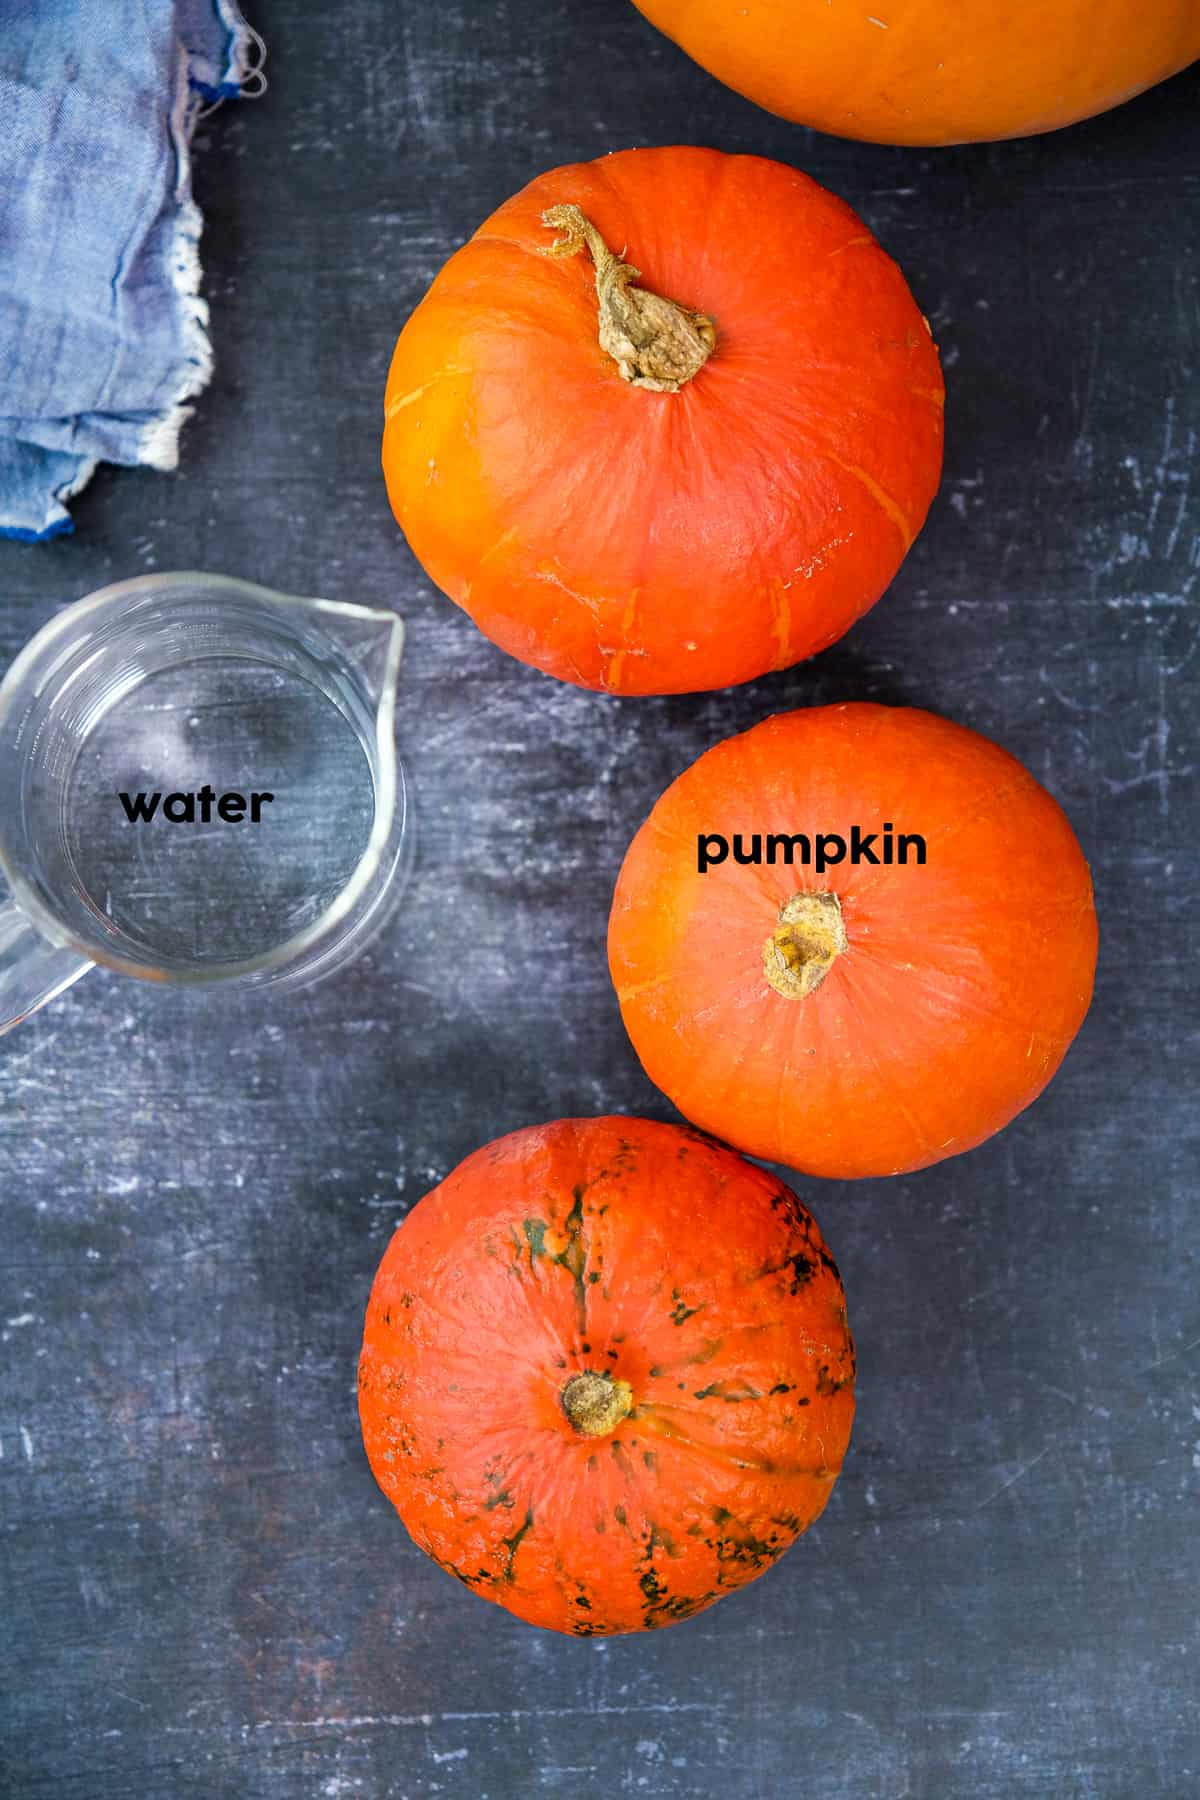 Small sugar pumpkins and a jug of a water on a dark background.